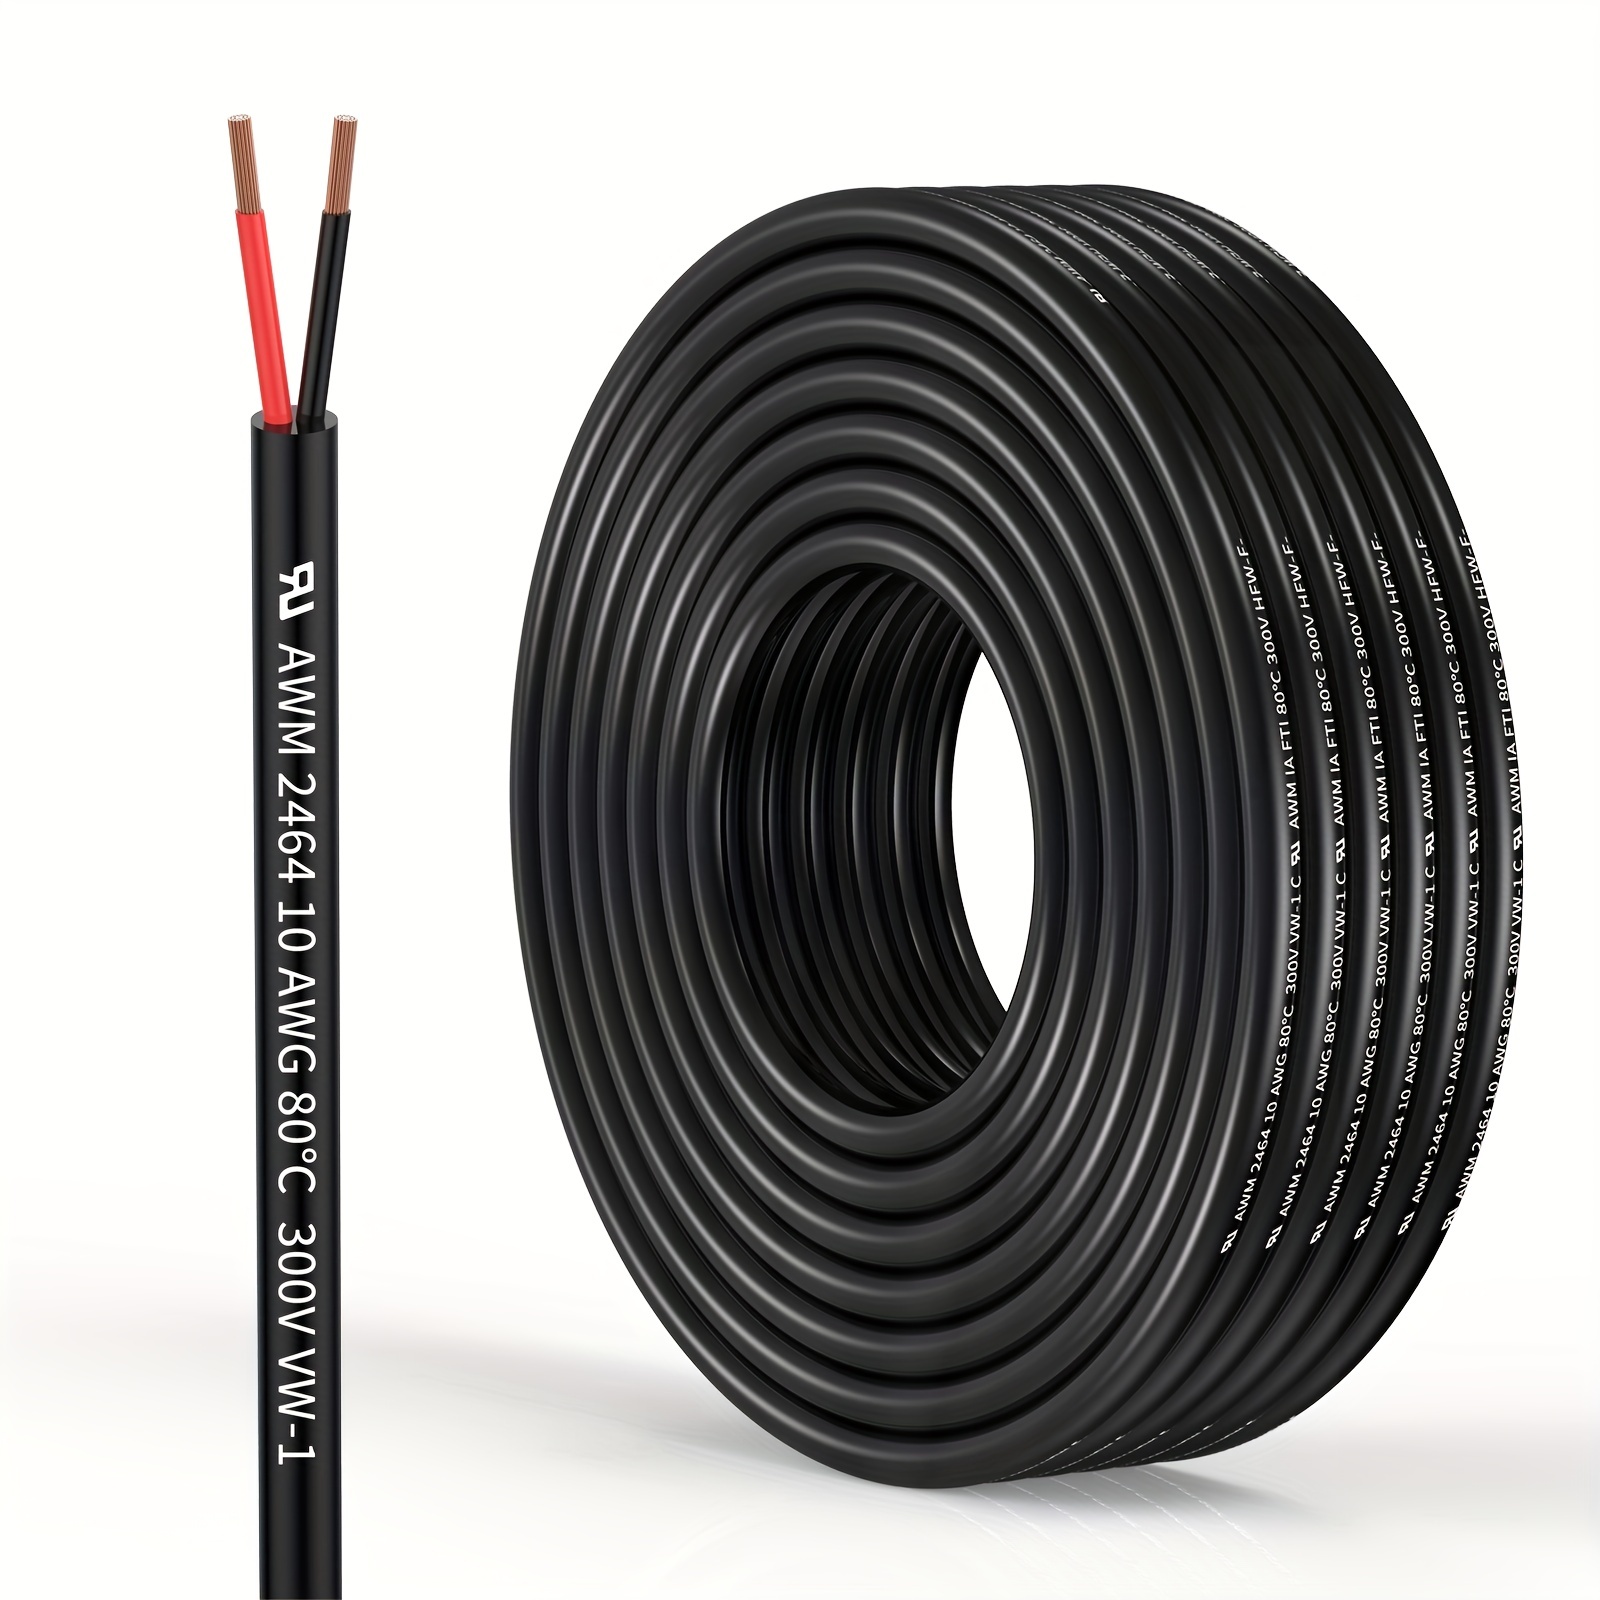 30FT 18 AWG Gauge Electrical Wire